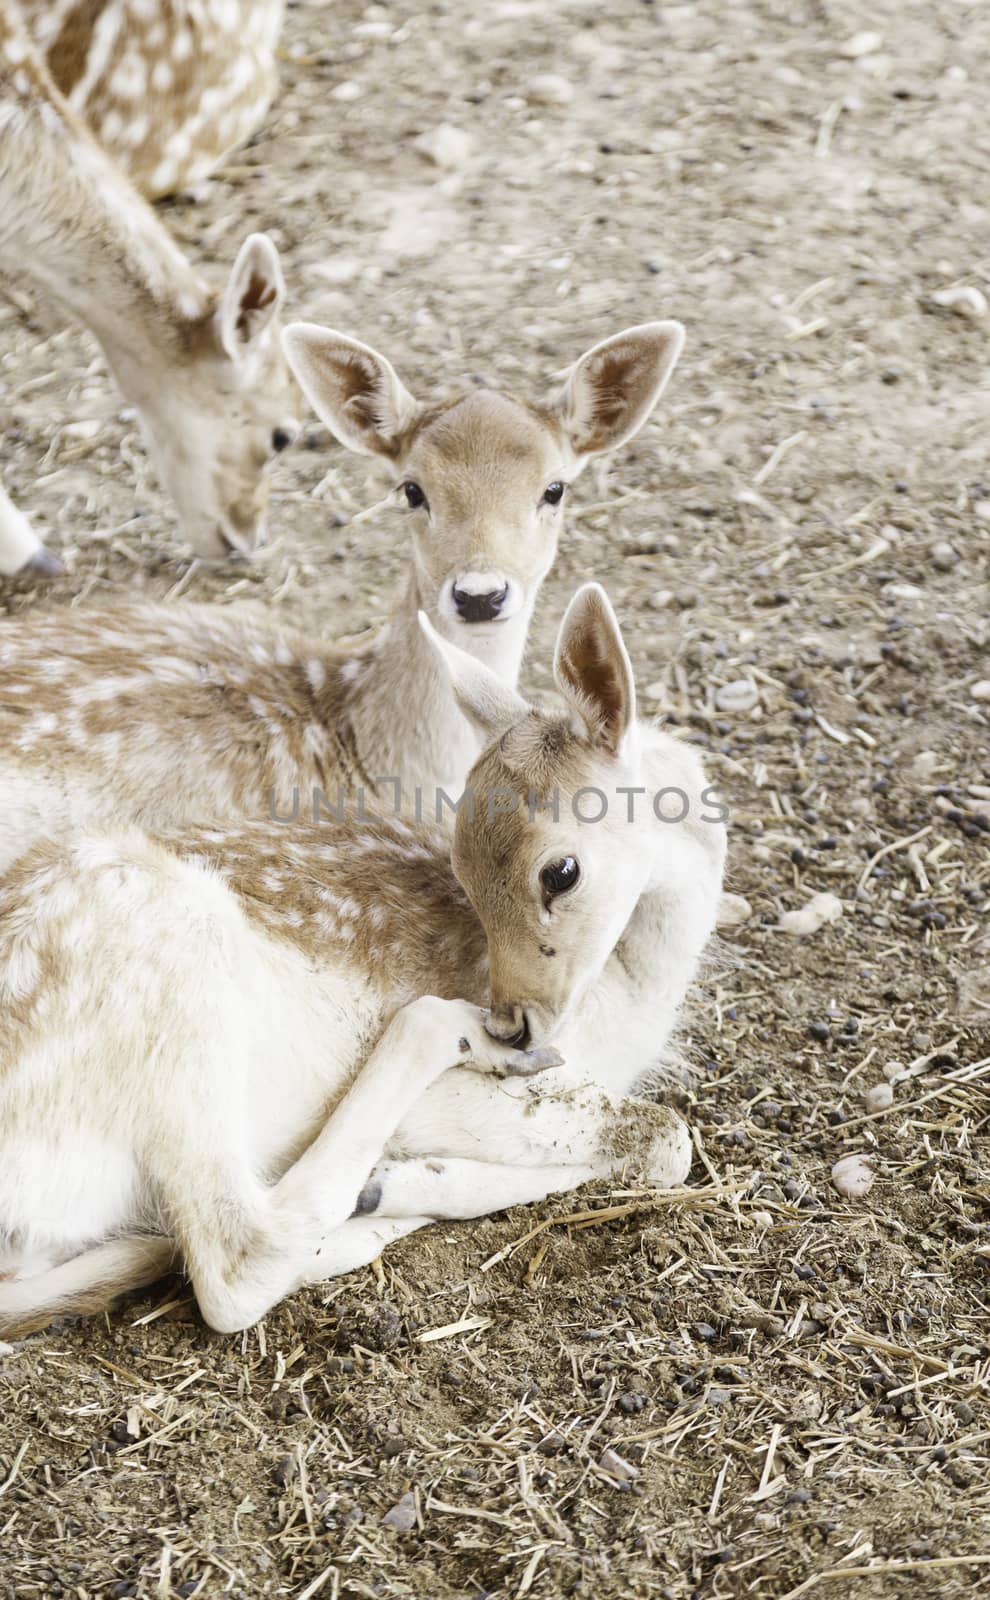 Young deer in a zoo by esebene